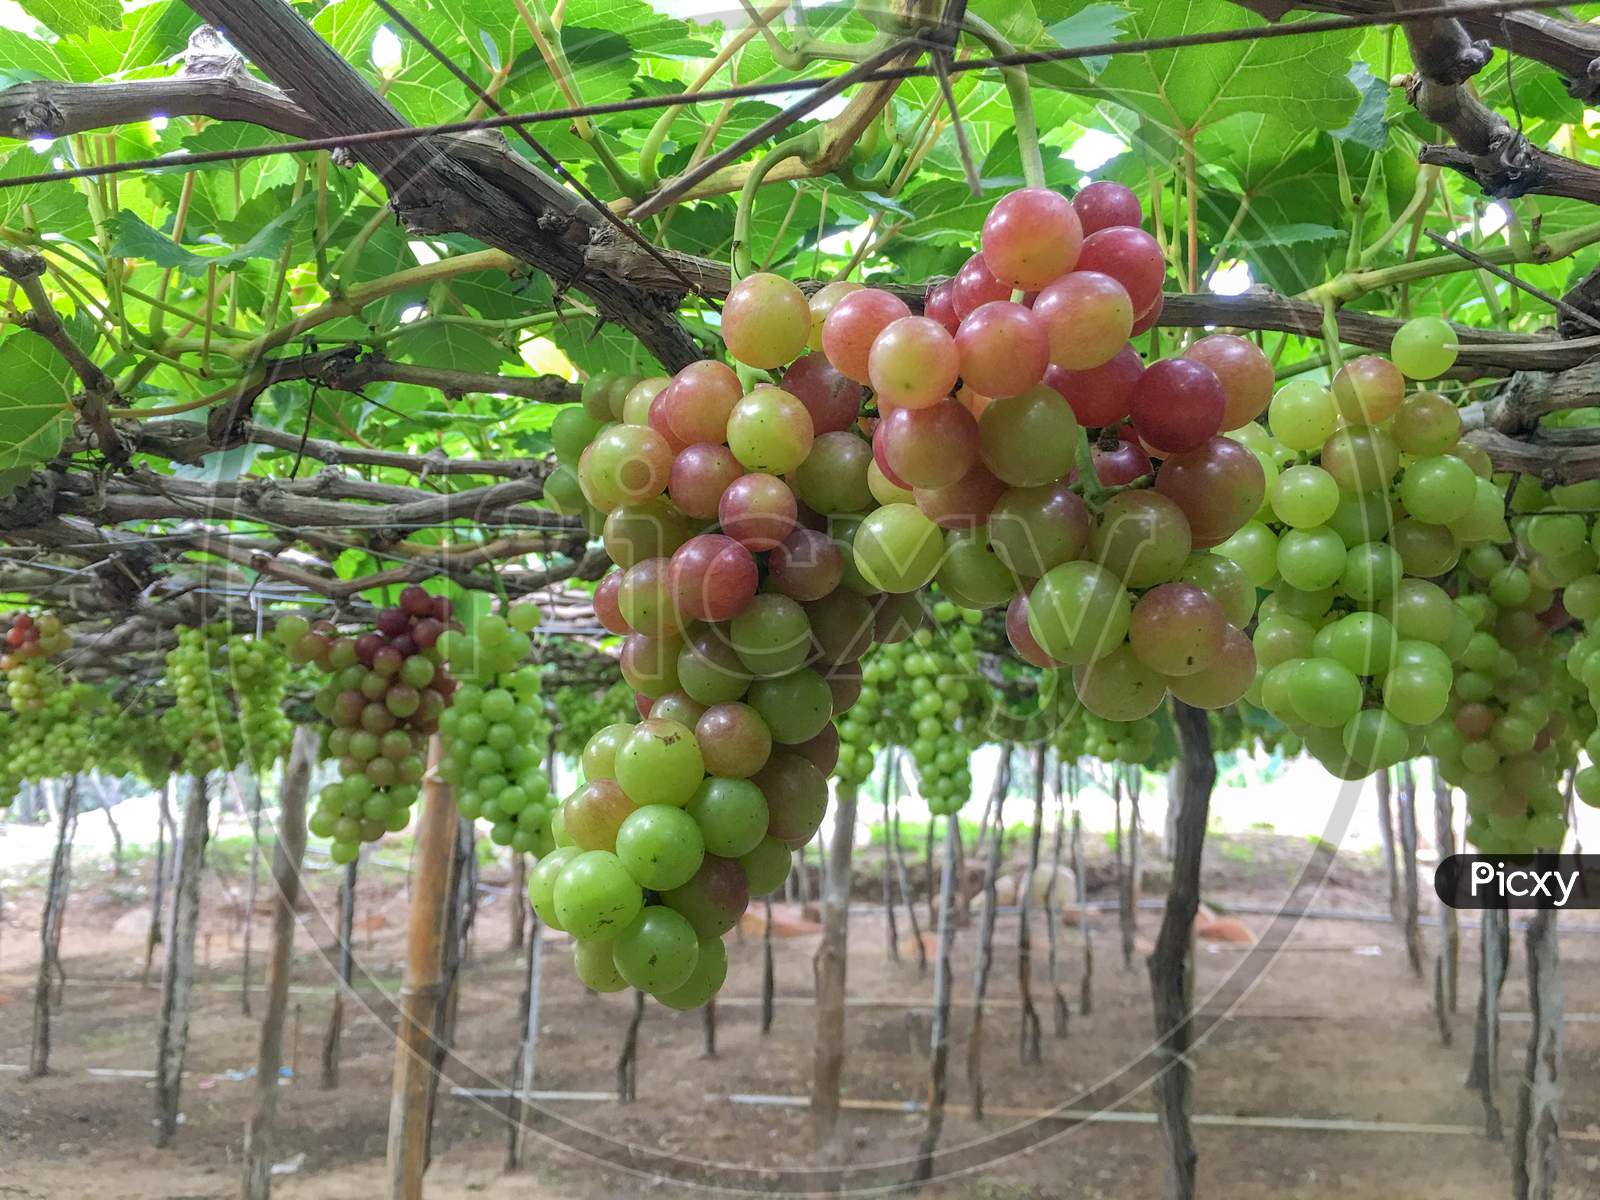 Bunch Of Ripe Grapes On A Tree In The Vineyard